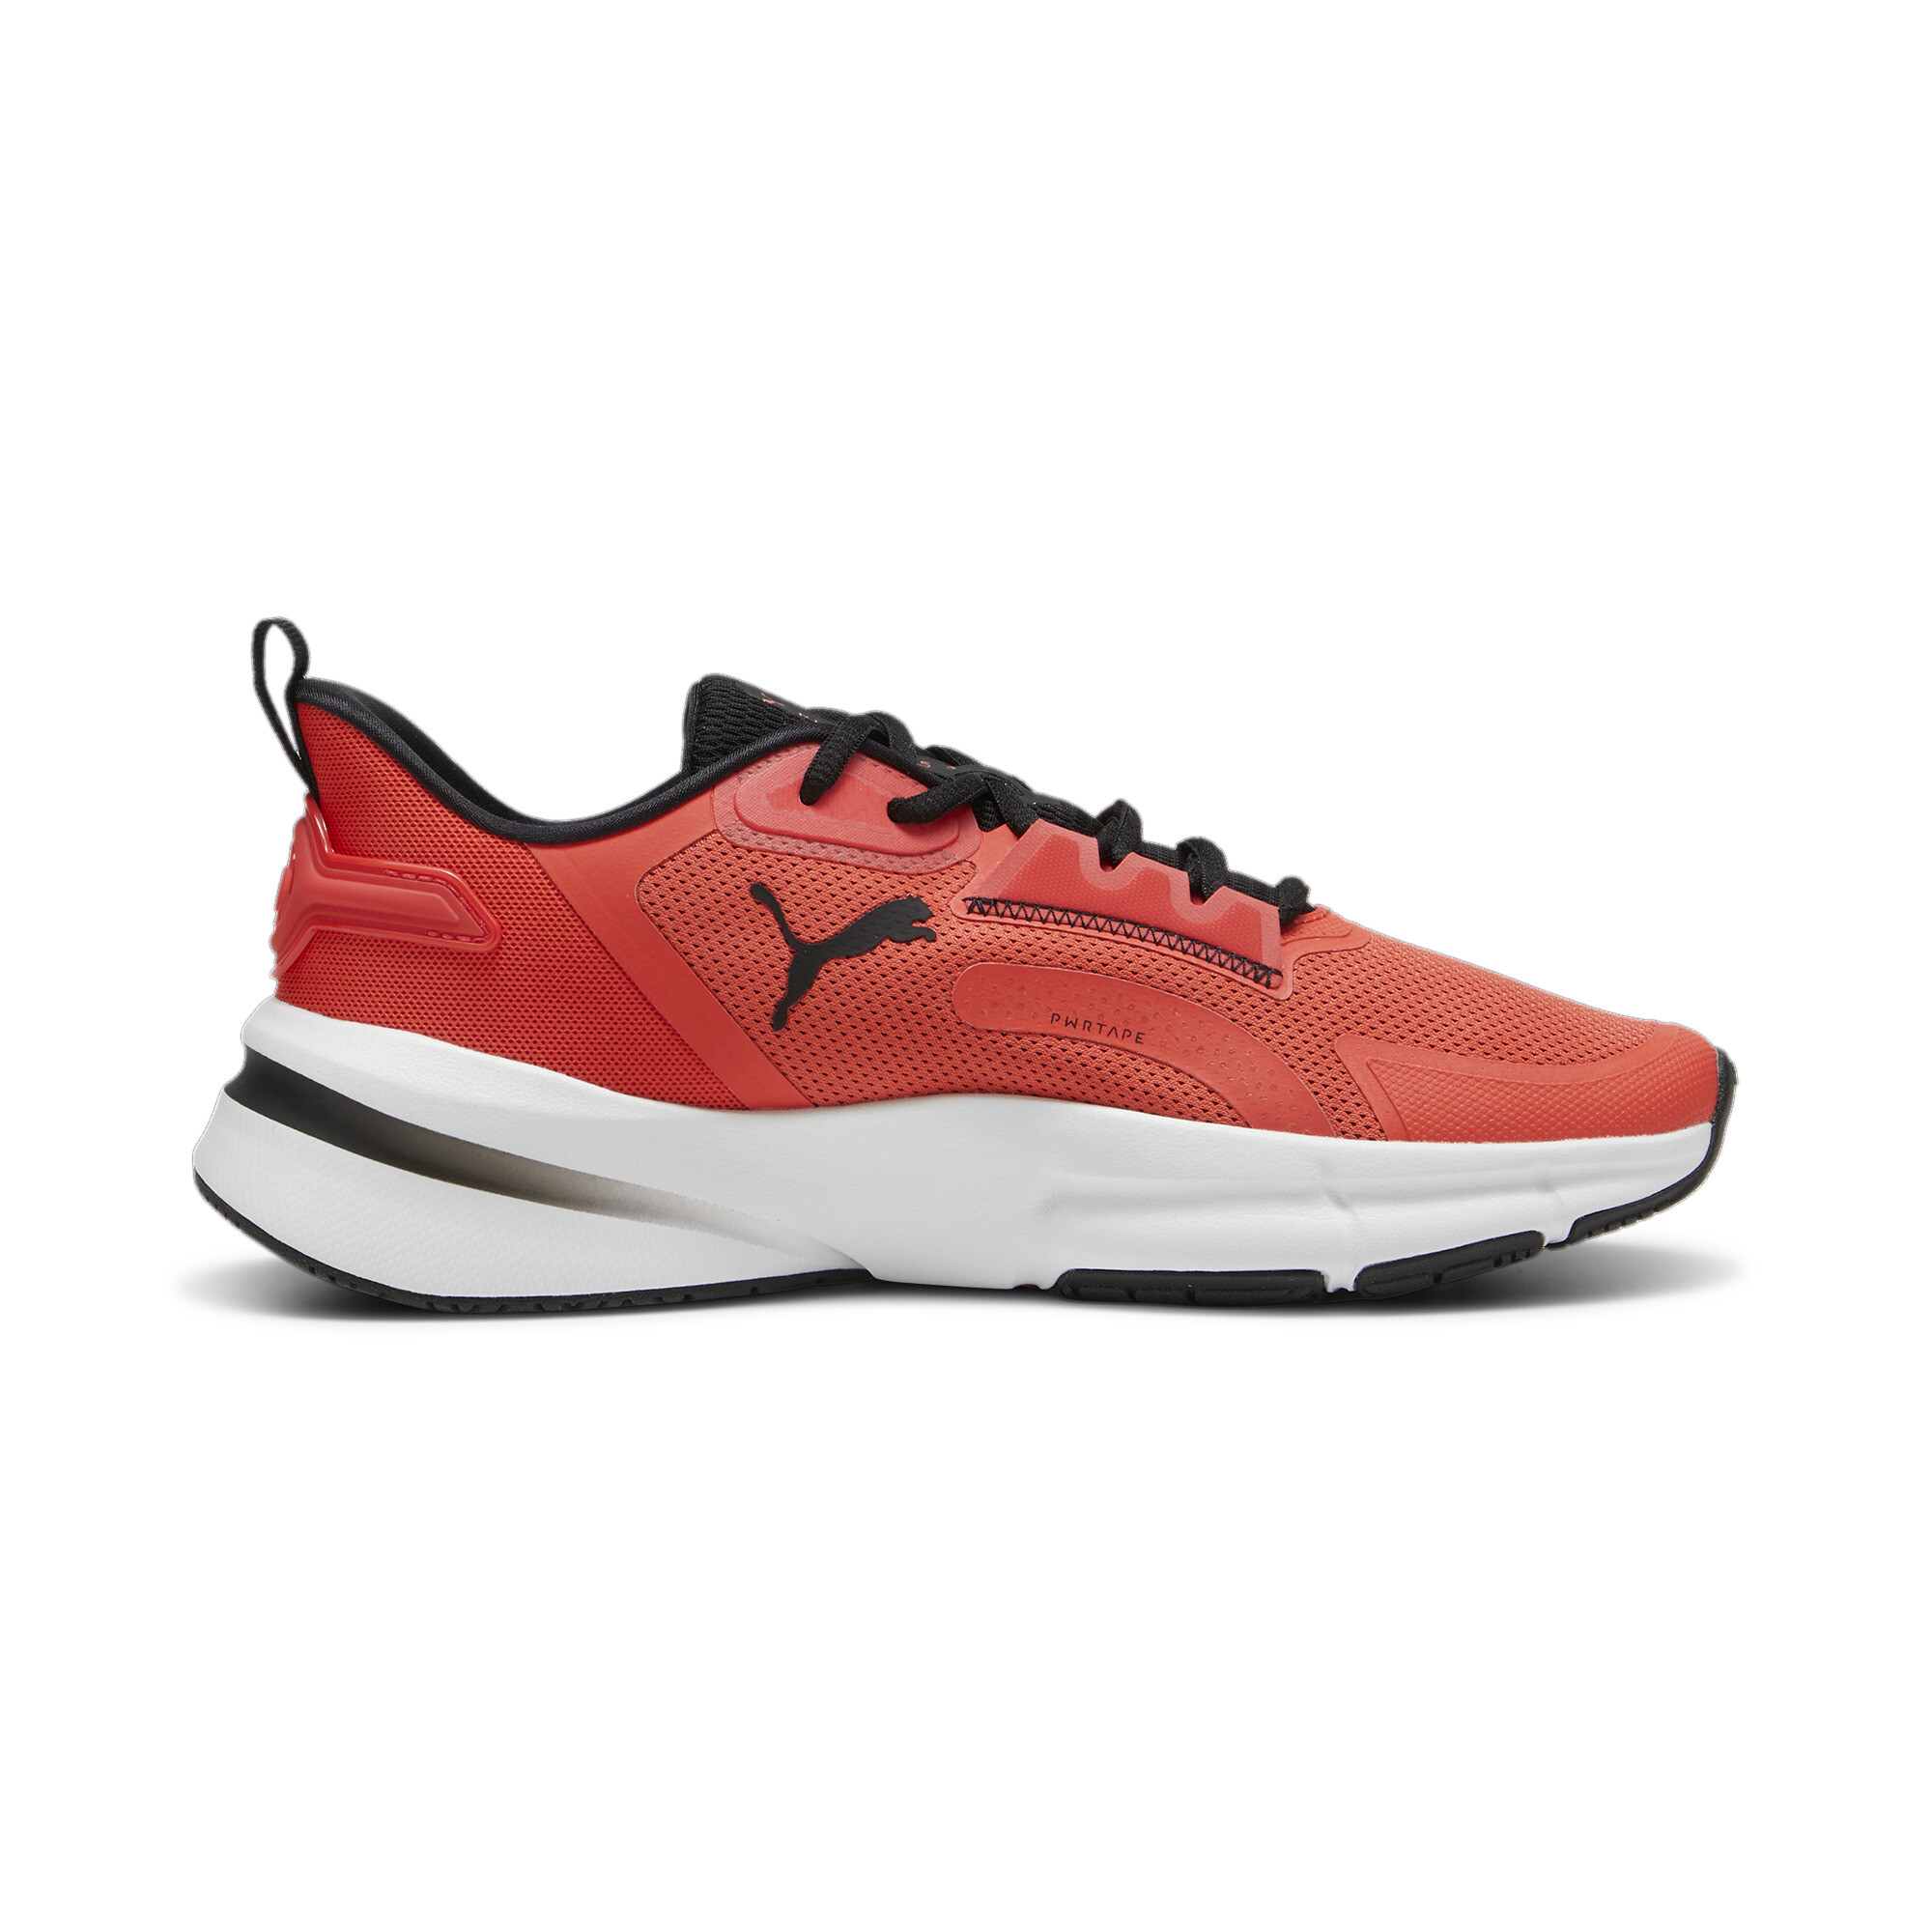 Men's PUMA PWRFrame TR 3 Training Shoes In Red, Size EU 44